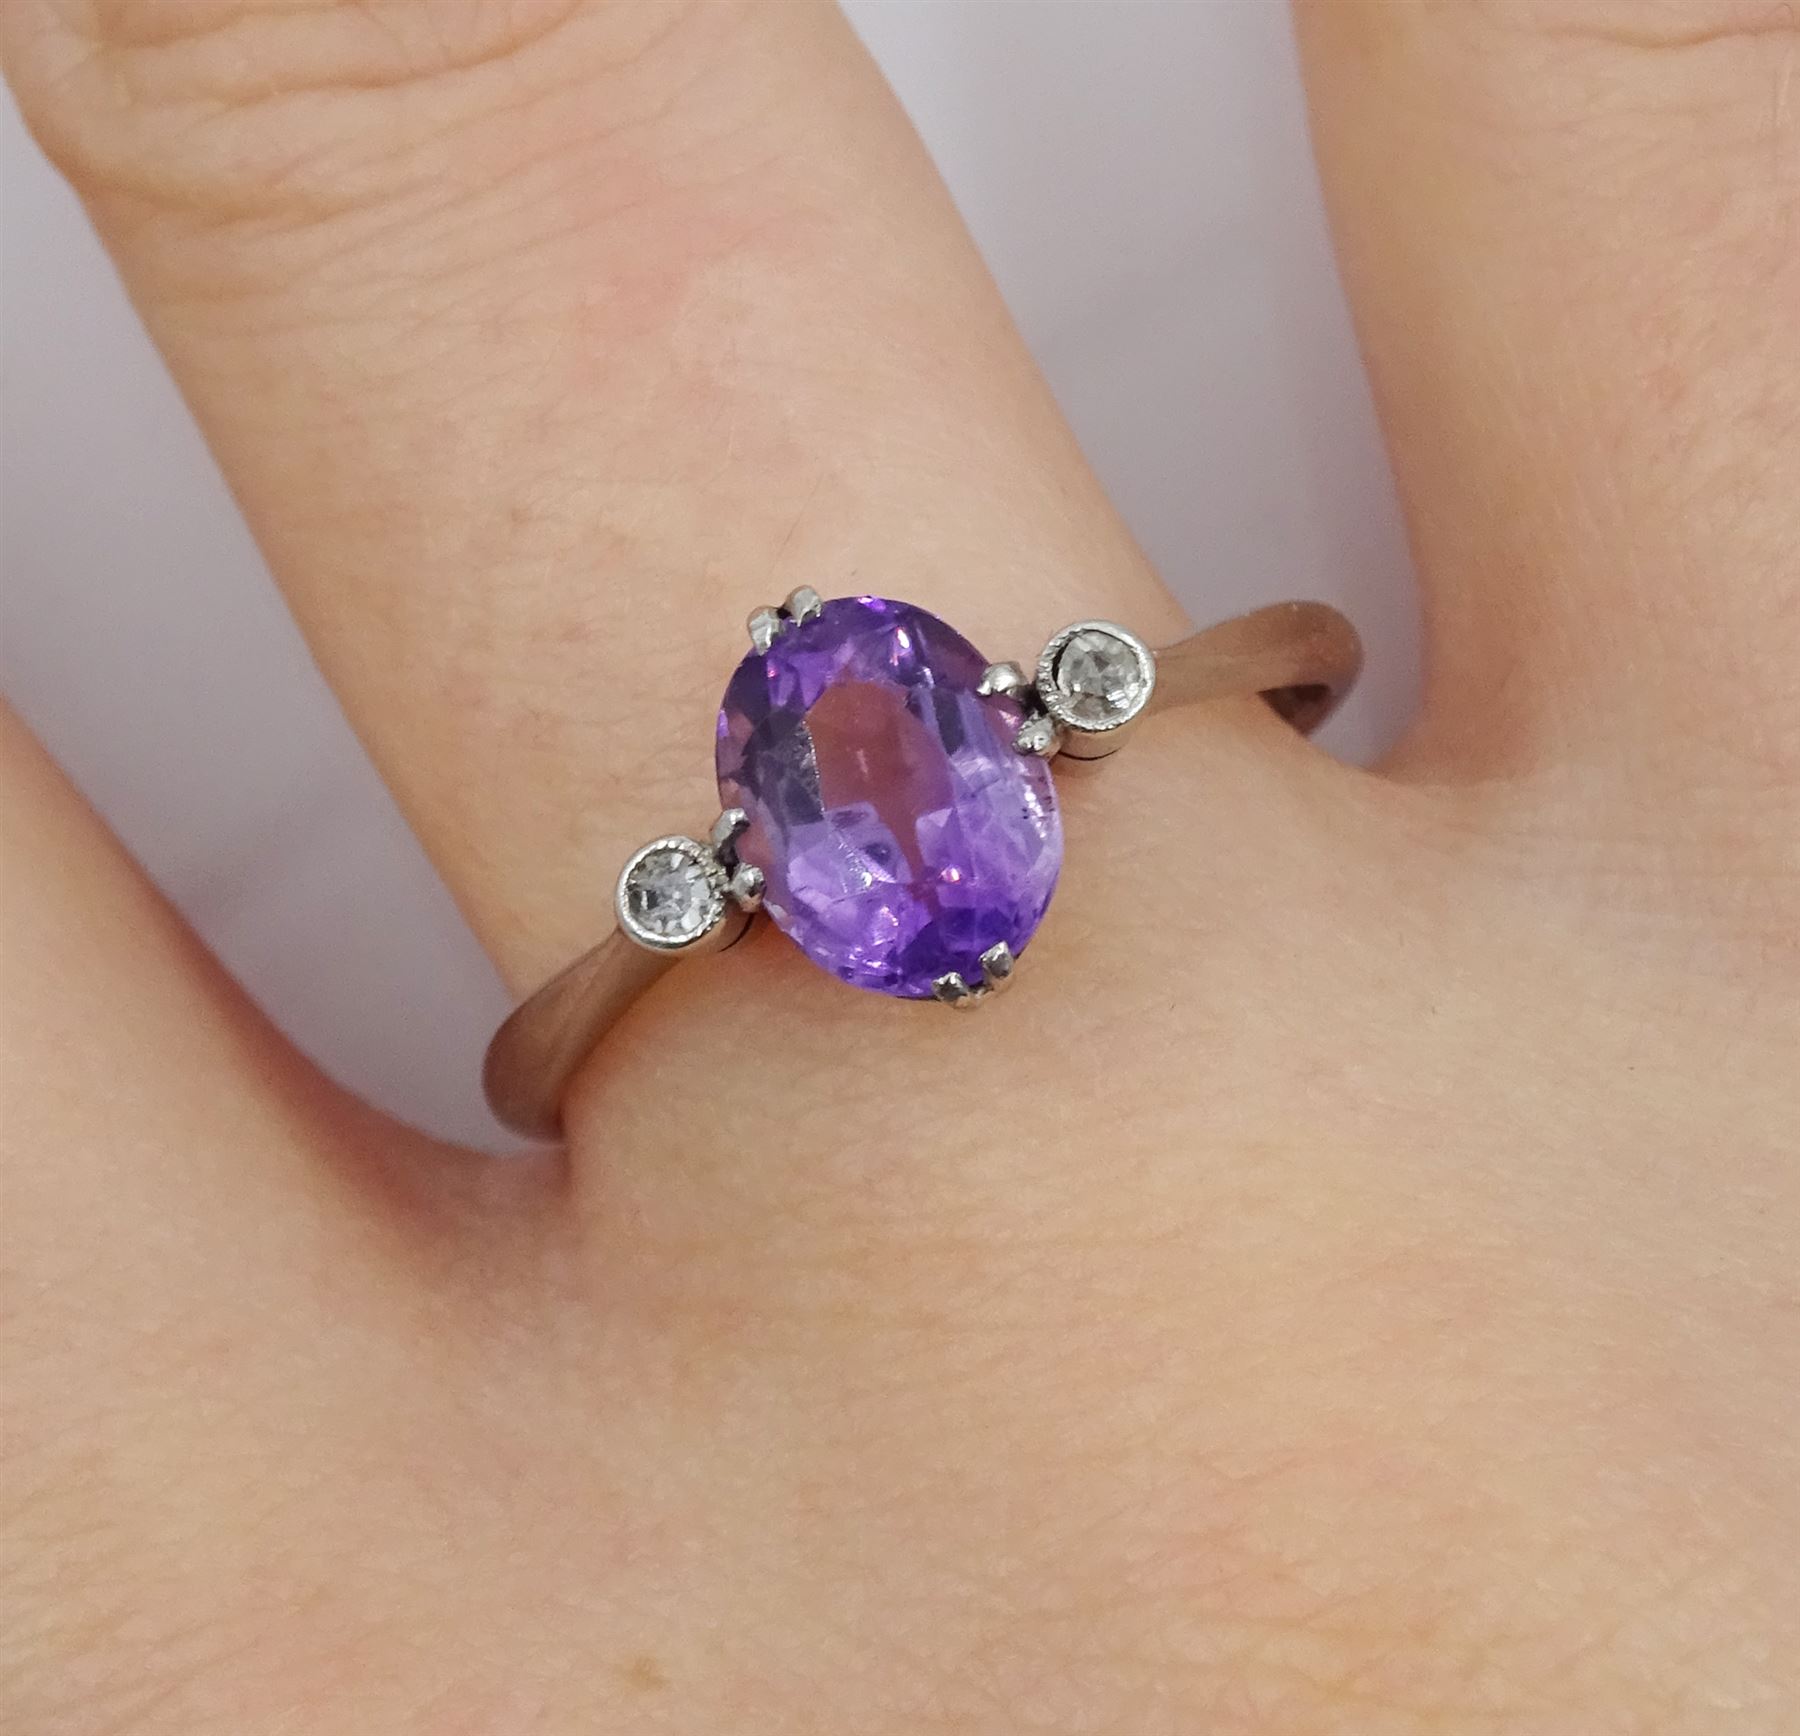 Early 20th century three stone oval amethyst and diamond chip ring - Image 2 of 4